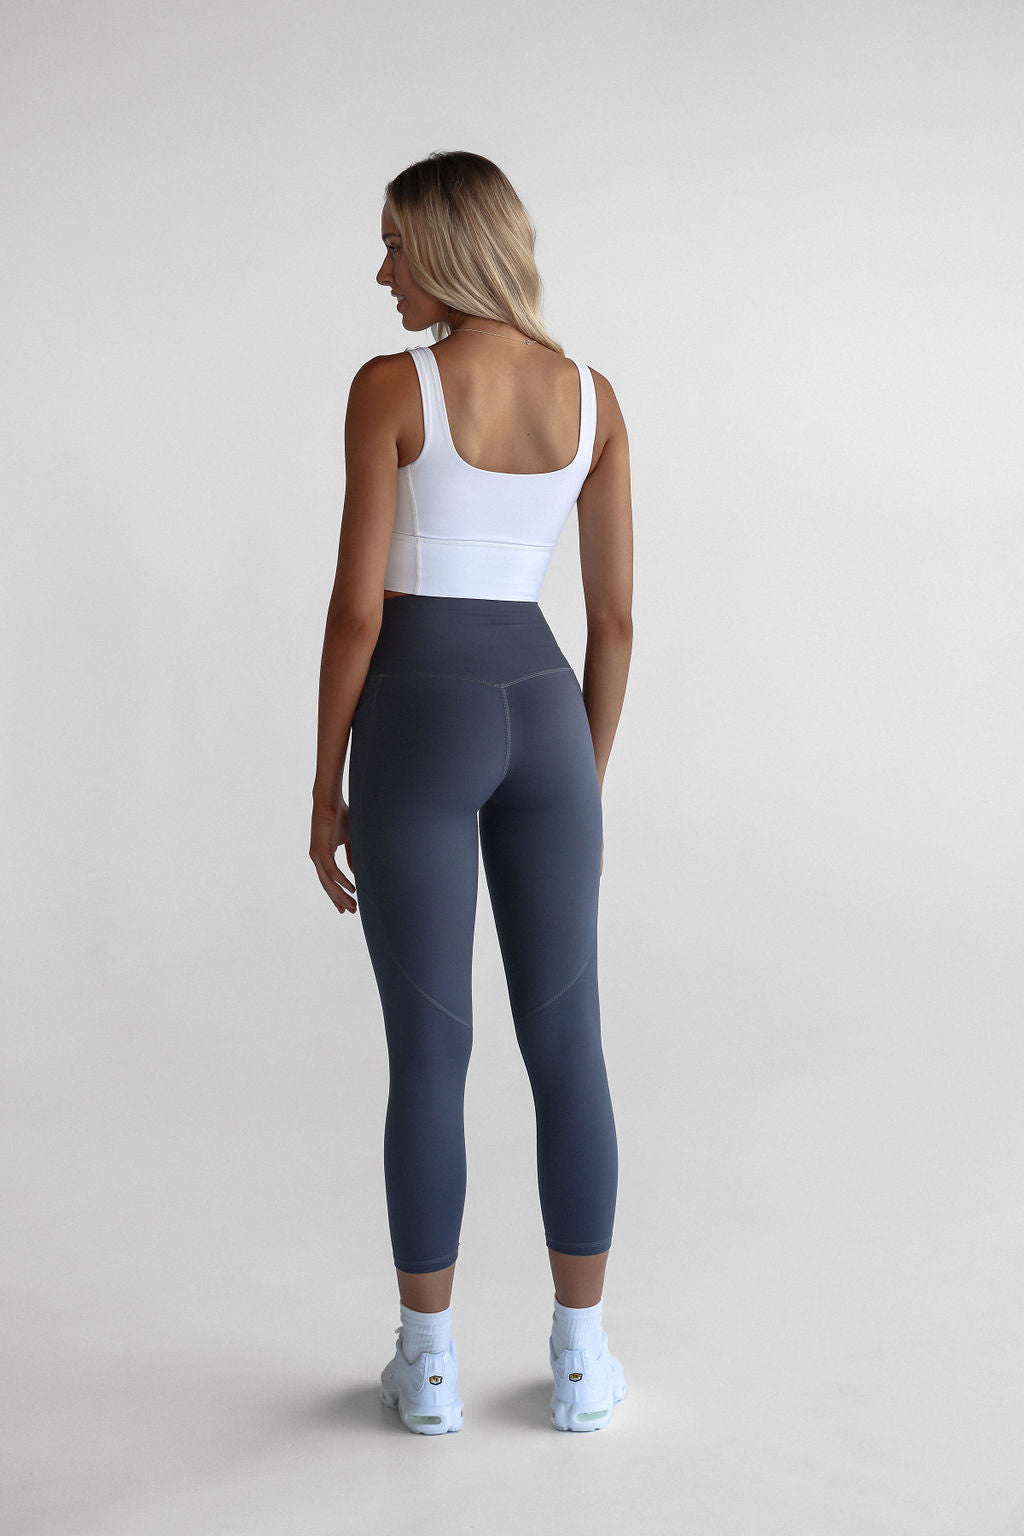 L*Space Active Slate Hot To Trot Ribbed Leggings